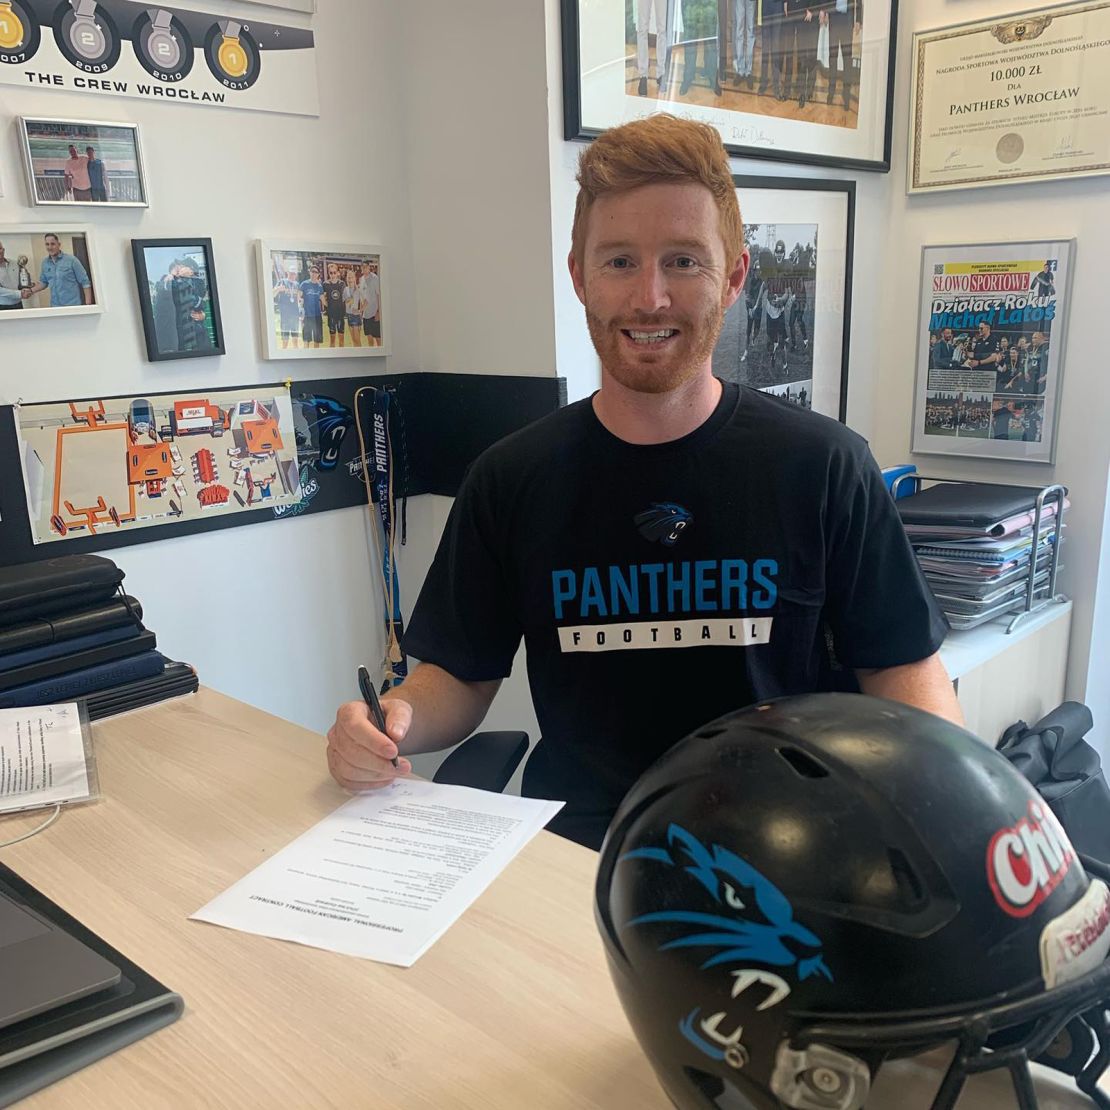 From Tadhg Leader Instagram: "Delighted to have signed to play in the @europeanleagueoffootball for the remainder of the season representing @pantherswroclaw. Just landed into Wroclaw today, beautiful city and lucky to have a great bunch of teammates. Looking forward to continuing the adventure! #wroclaw #panthers #thejourneycontinues"